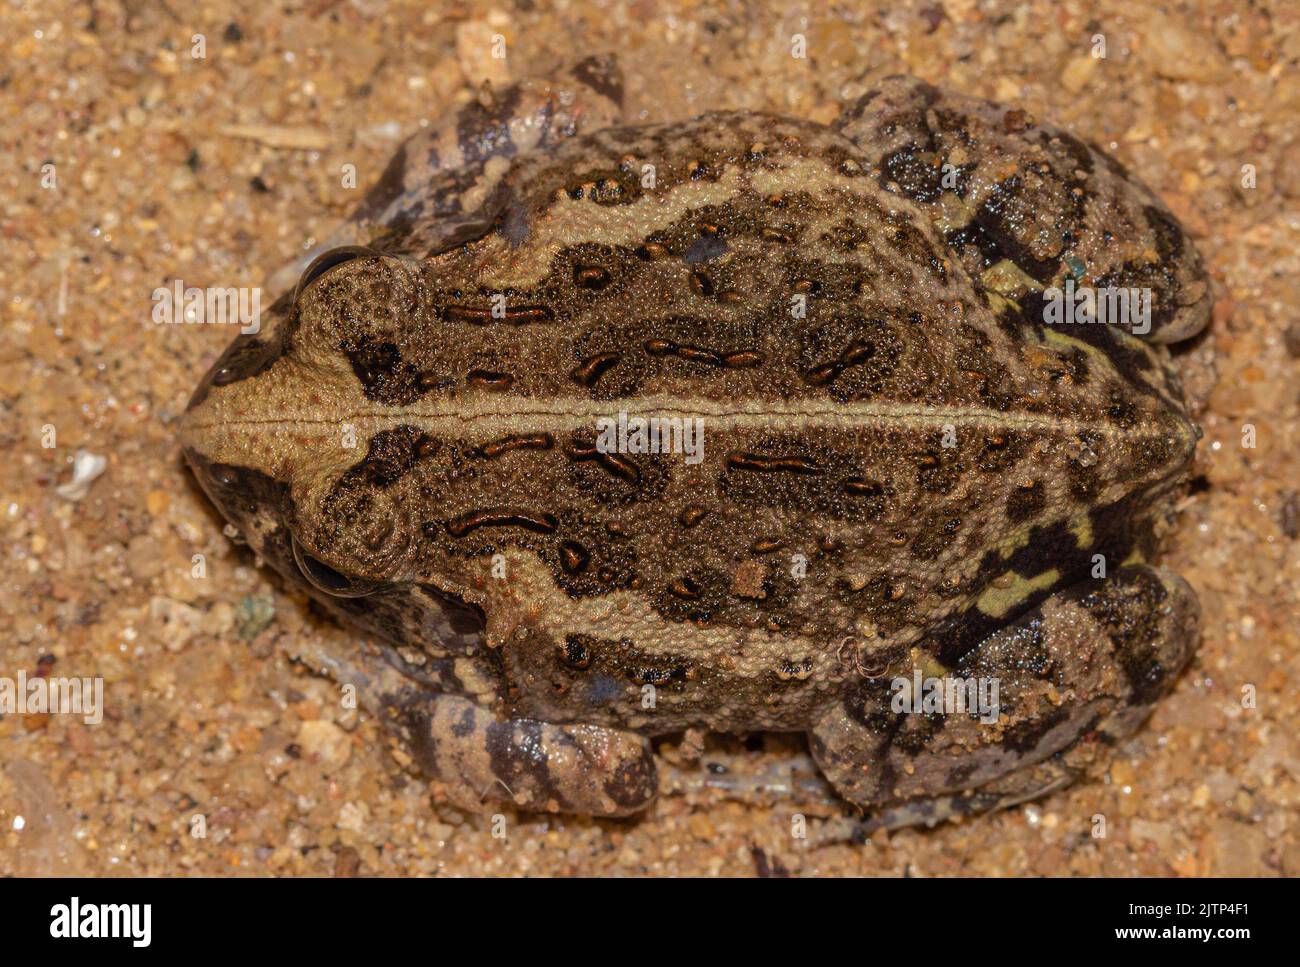 frog on the ground; frog in the sand; colourful frog; cute froggy; little frog; Uperodon taprobanicus from Sri Lanka; burrowing frog; Toilet frog; fro Stock Photo